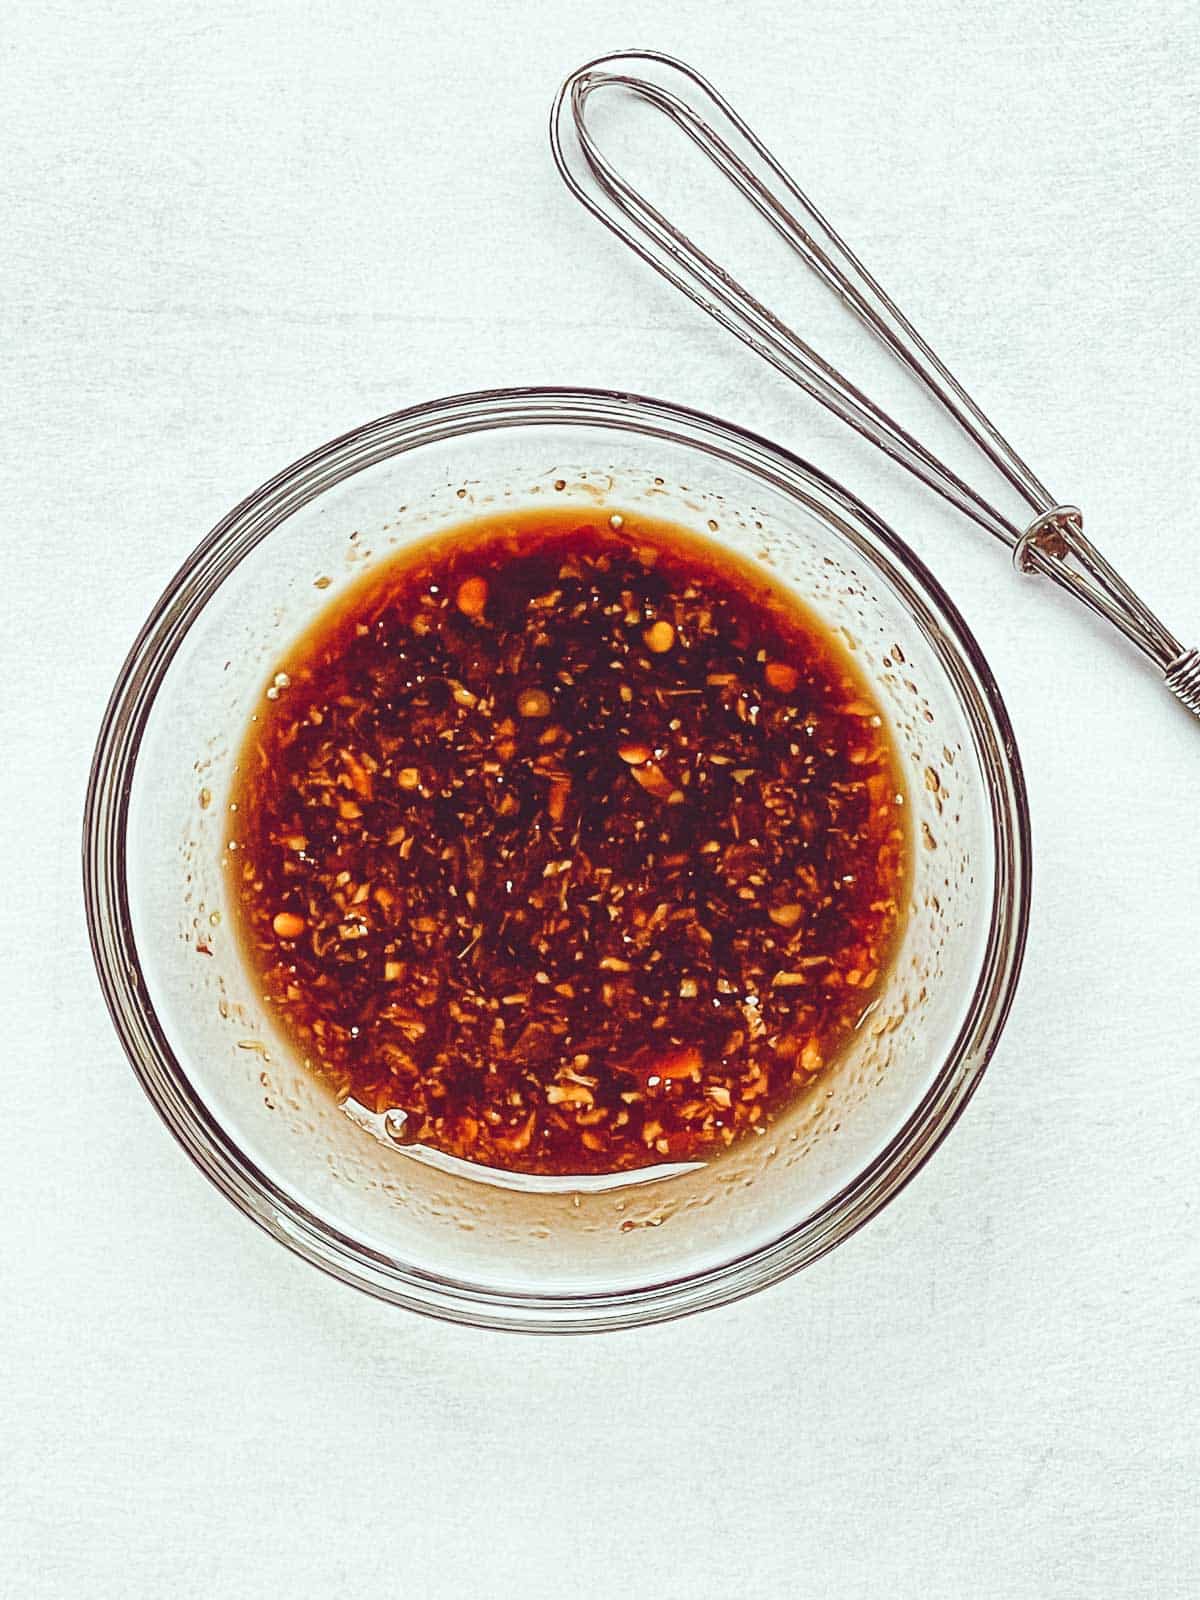 A spicy red chili sauce in a glass bowl with a small whisk on the side.